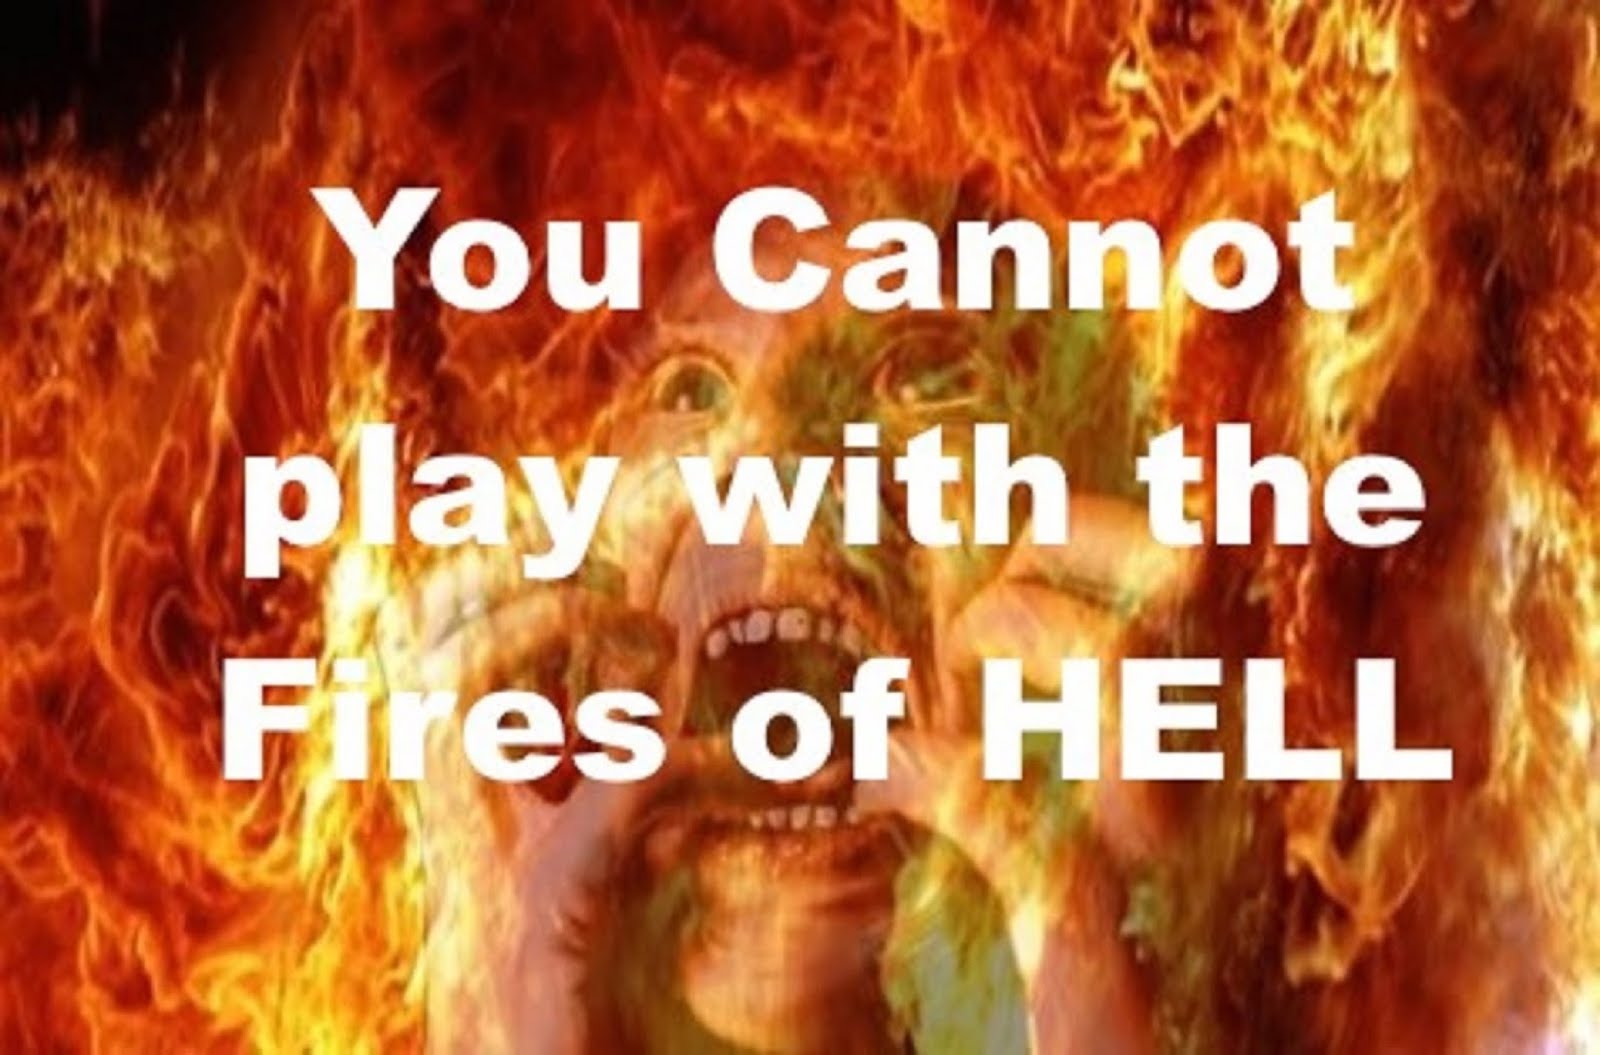 8. YOU CANNOT PLAY WITH THE FIRES OF HELL - (INVALID SINNERS PRAYER)